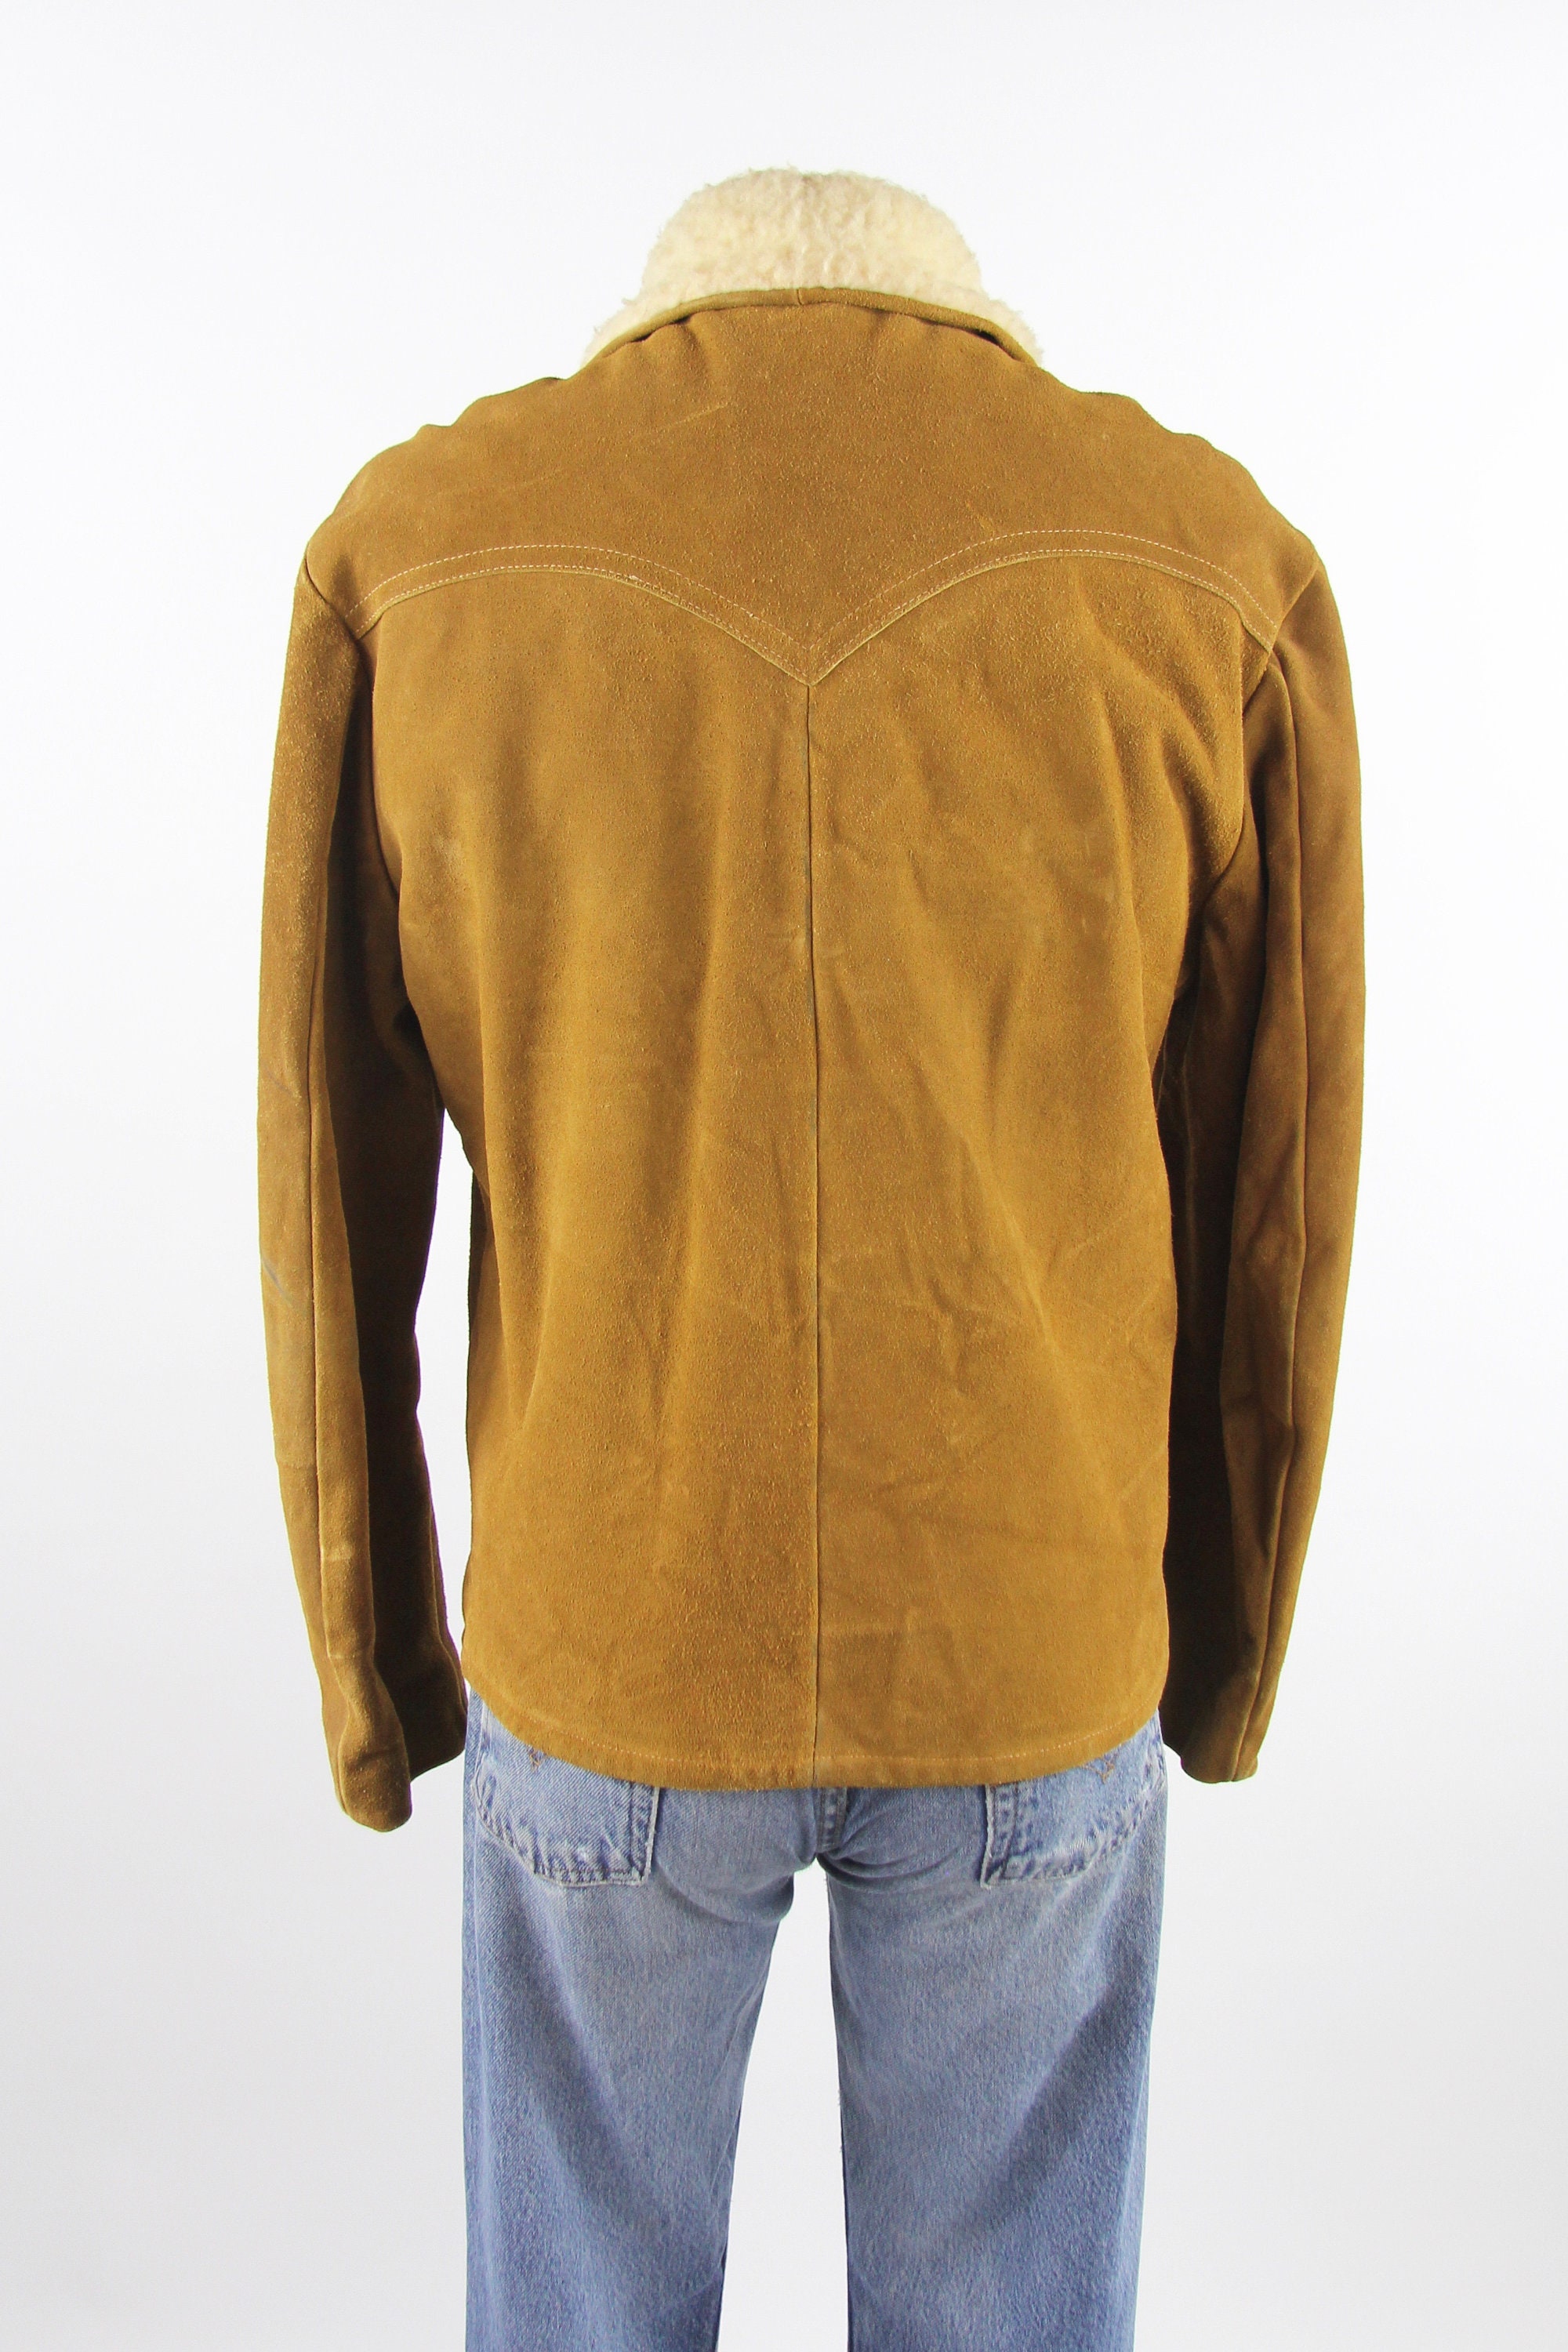 60's Suede Leather Jacket Jo-O-Kay Sherpa Lined Snap Button Men's Brown ...